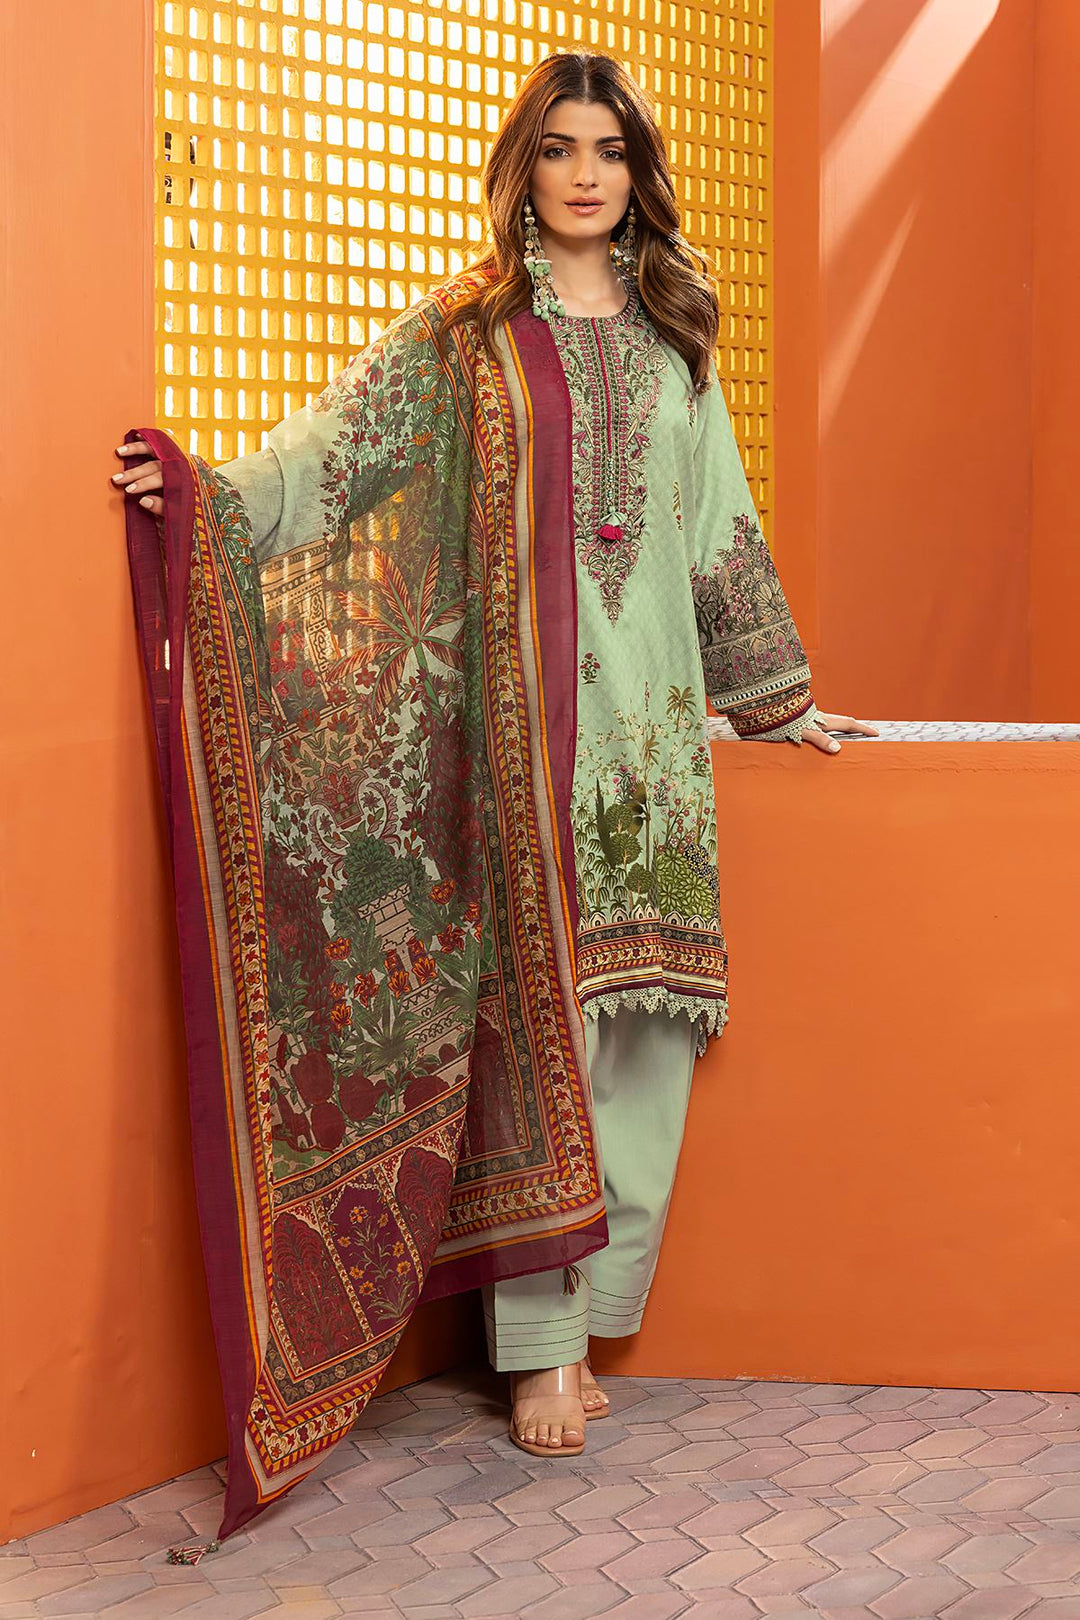 shop pakistani dresses online a woman standing in front of a wall wearing a green and maroon dress